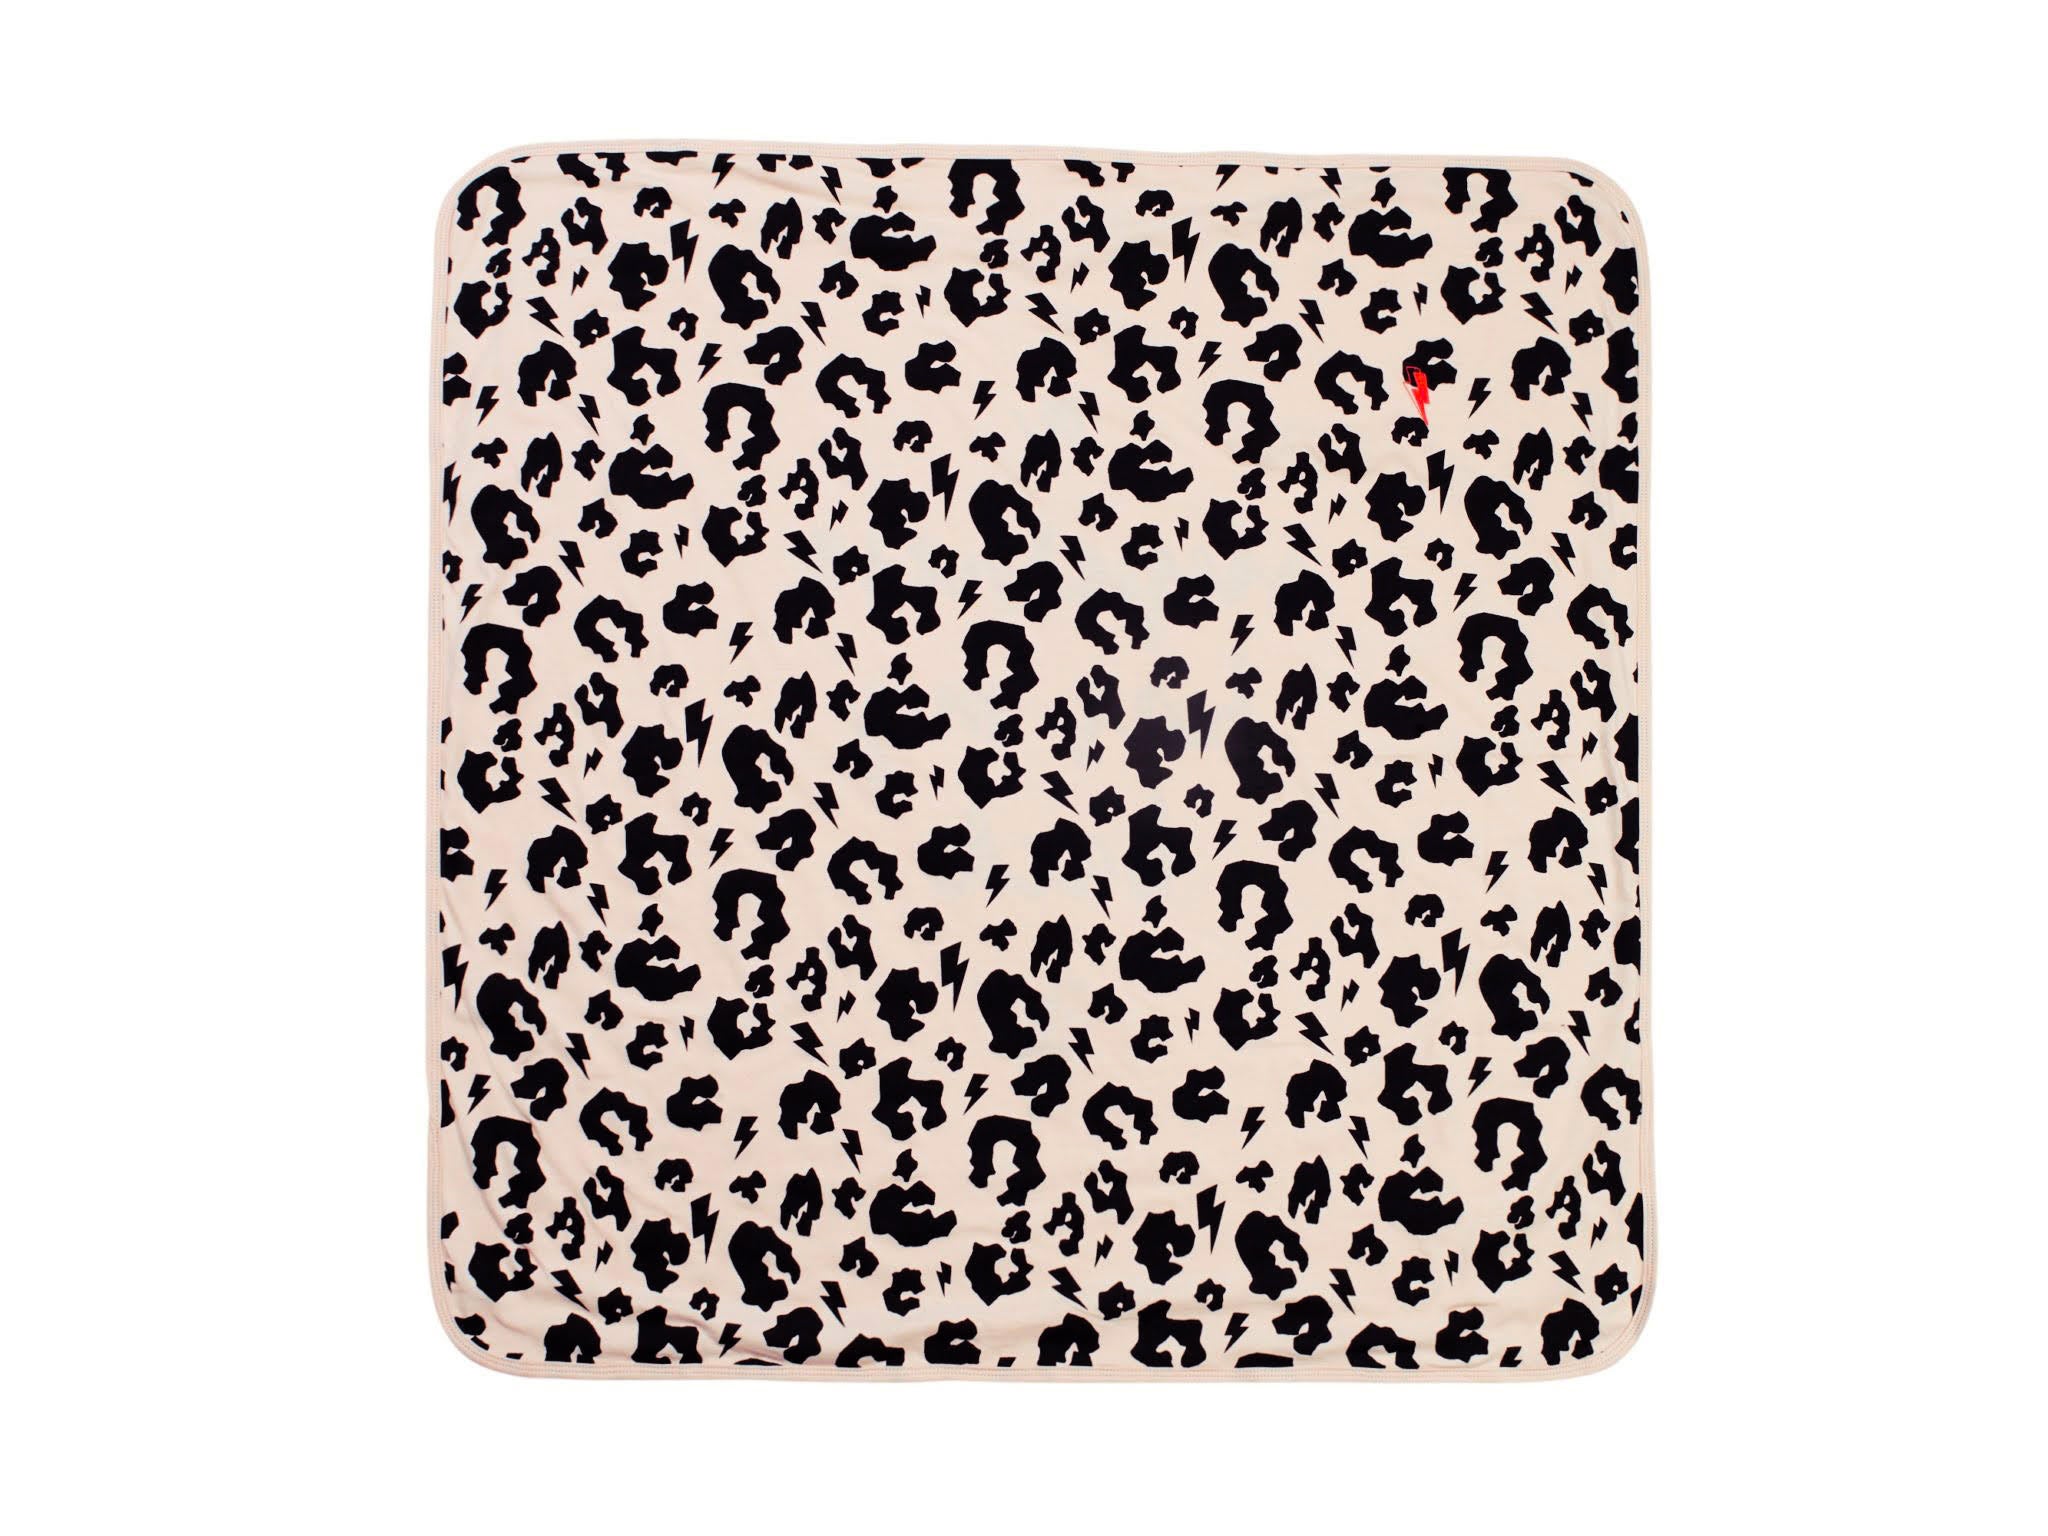 Scamp and Dude blush leopard baby blanket.jpg